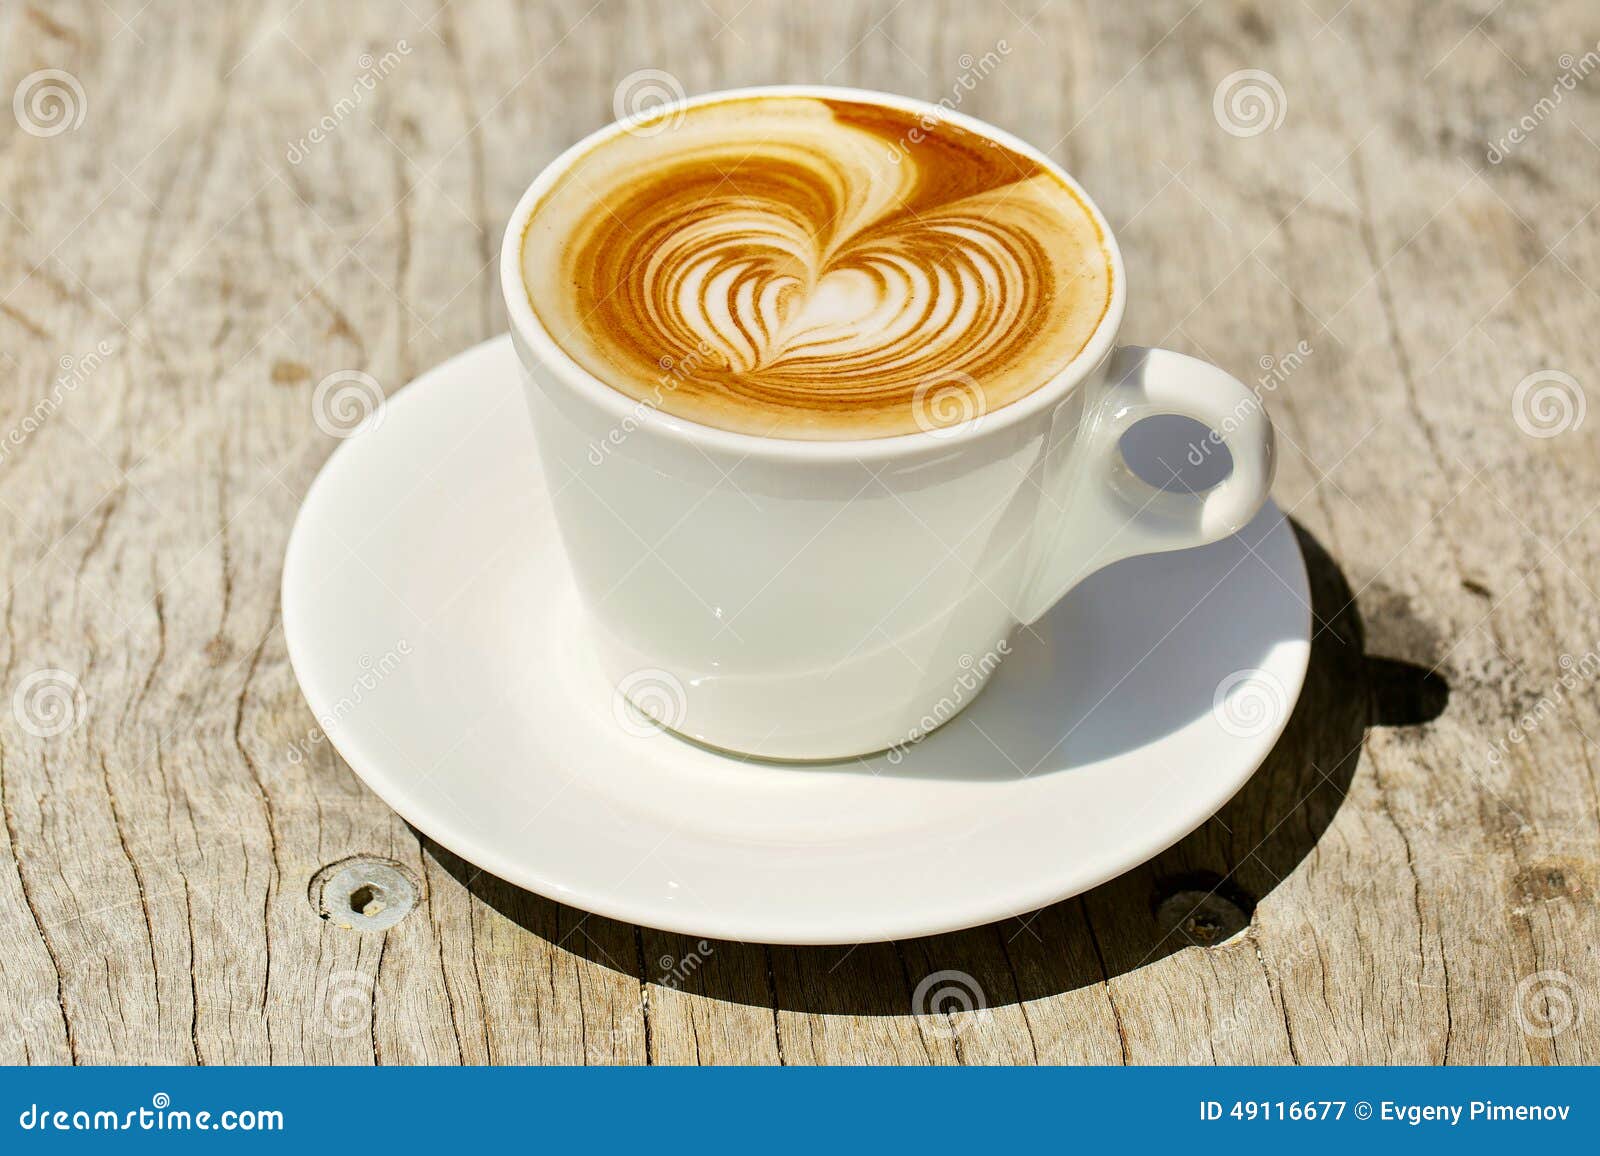 cappuchino or latte coffe in a white cup with